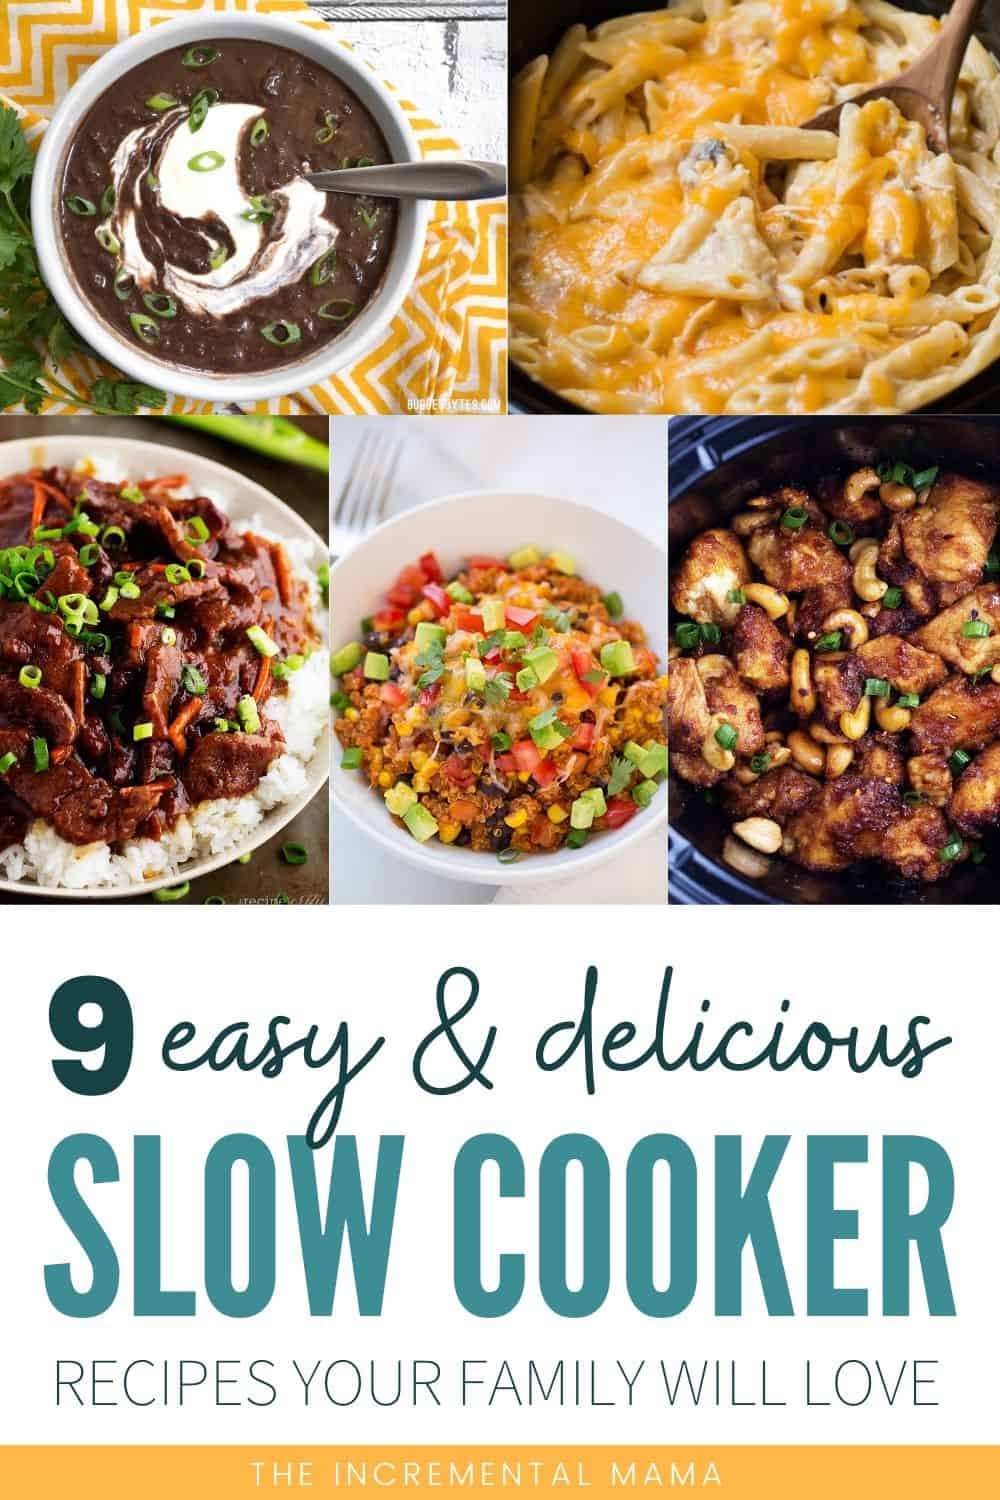 9 Easy Slow Cooker Recipes Your Family will Love